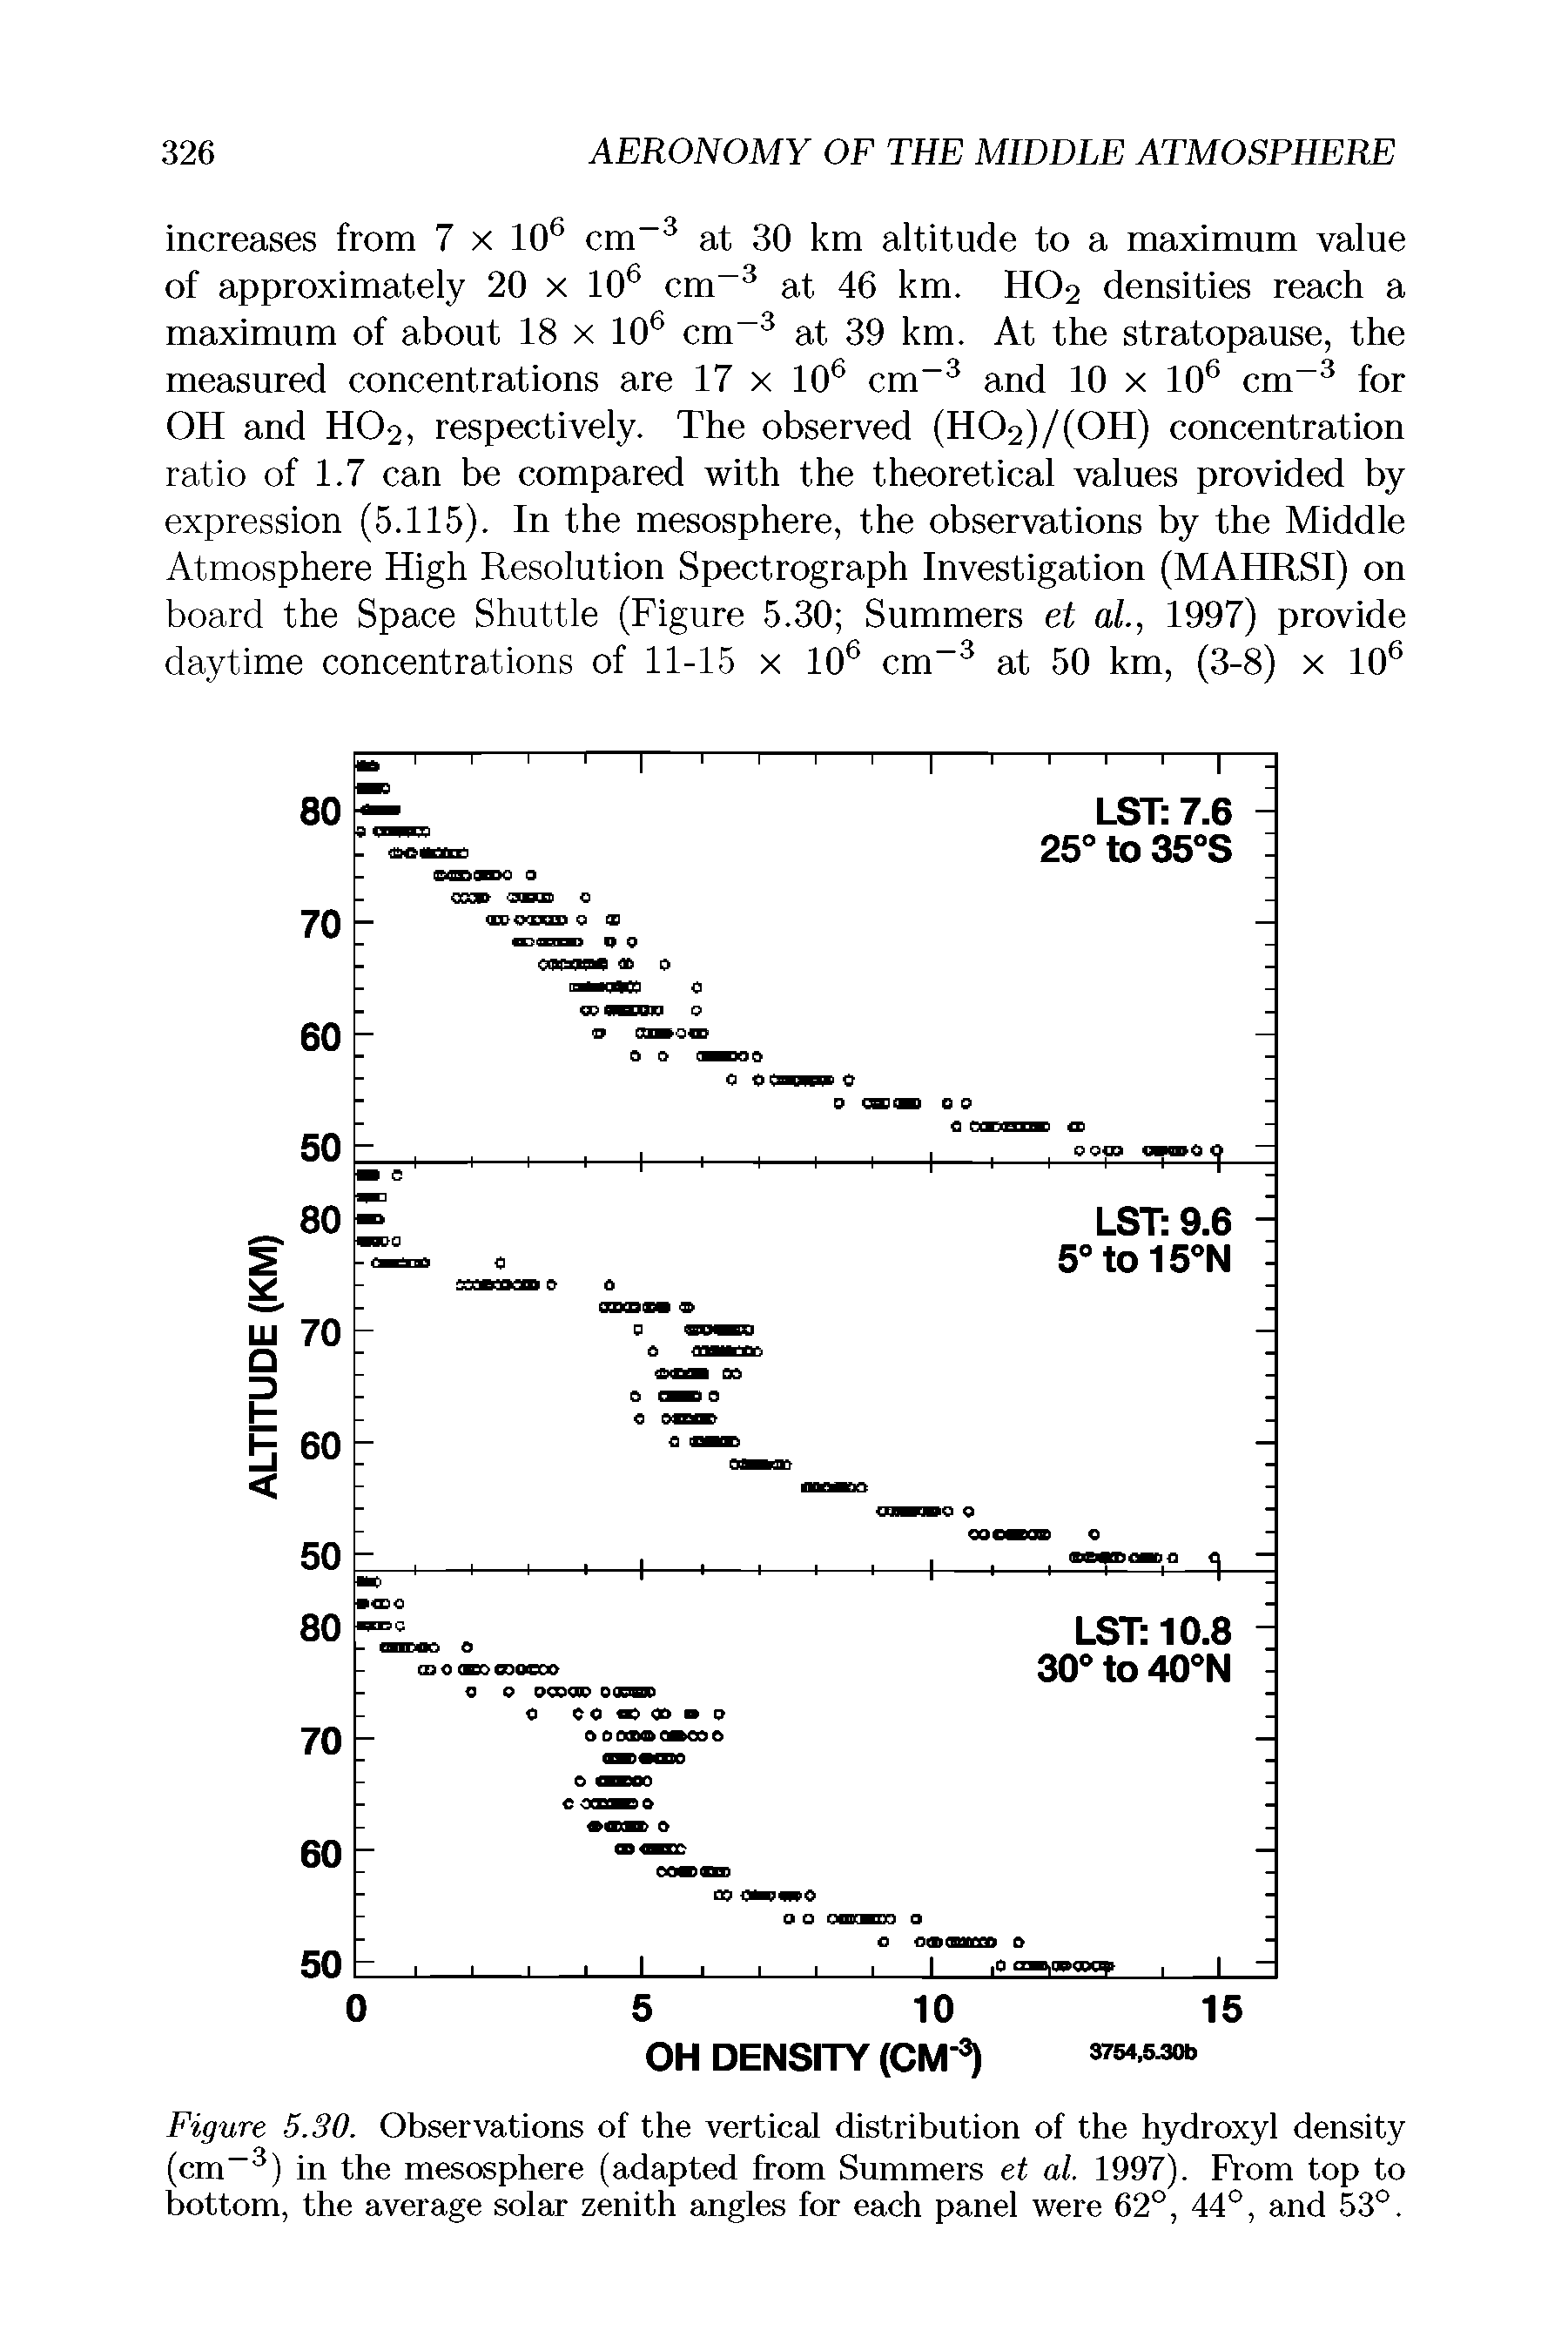 Figure 5.30. Observations of the vertical distribution of the hydroxyl density (cm-3) in the mesosphere (adapted from Summers et al. 1997). From top to bottom, the average solar zenith angles for each panel were 62°, 44°, and 53°.